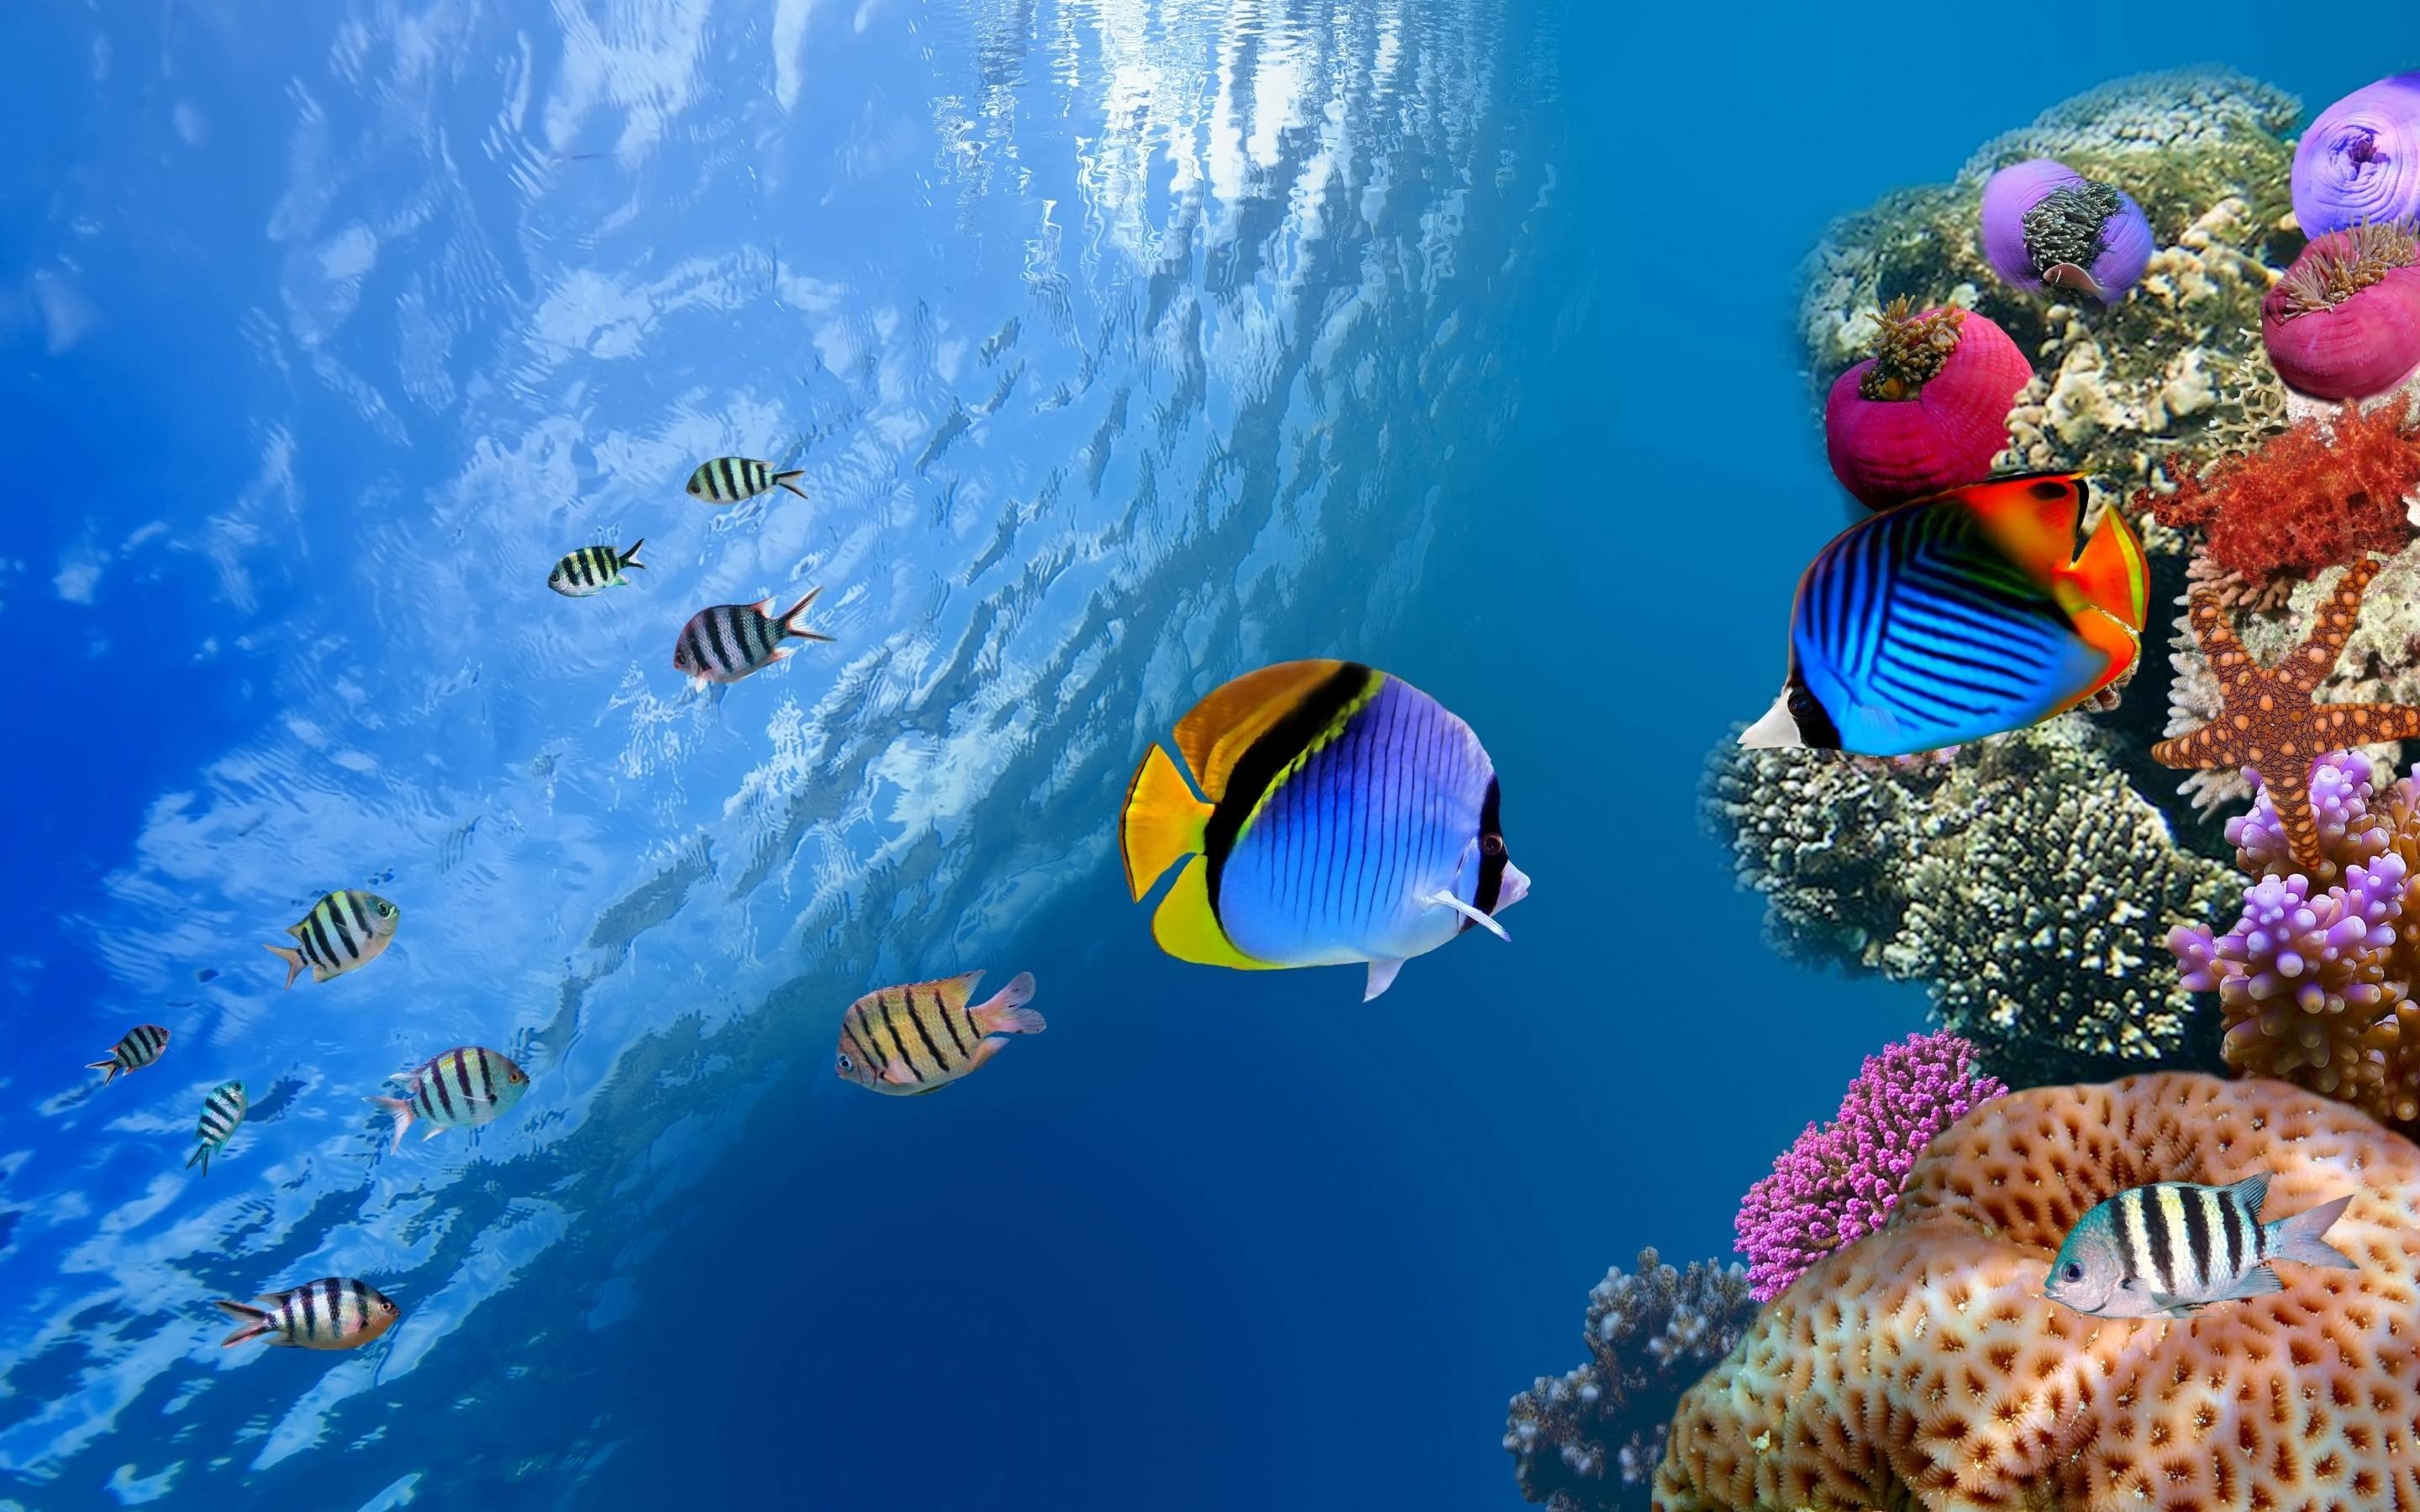 62+ Underwater Wallpapers: HD, 4K, 5K for PC and Mobile | Download free  images for iPhone, Android